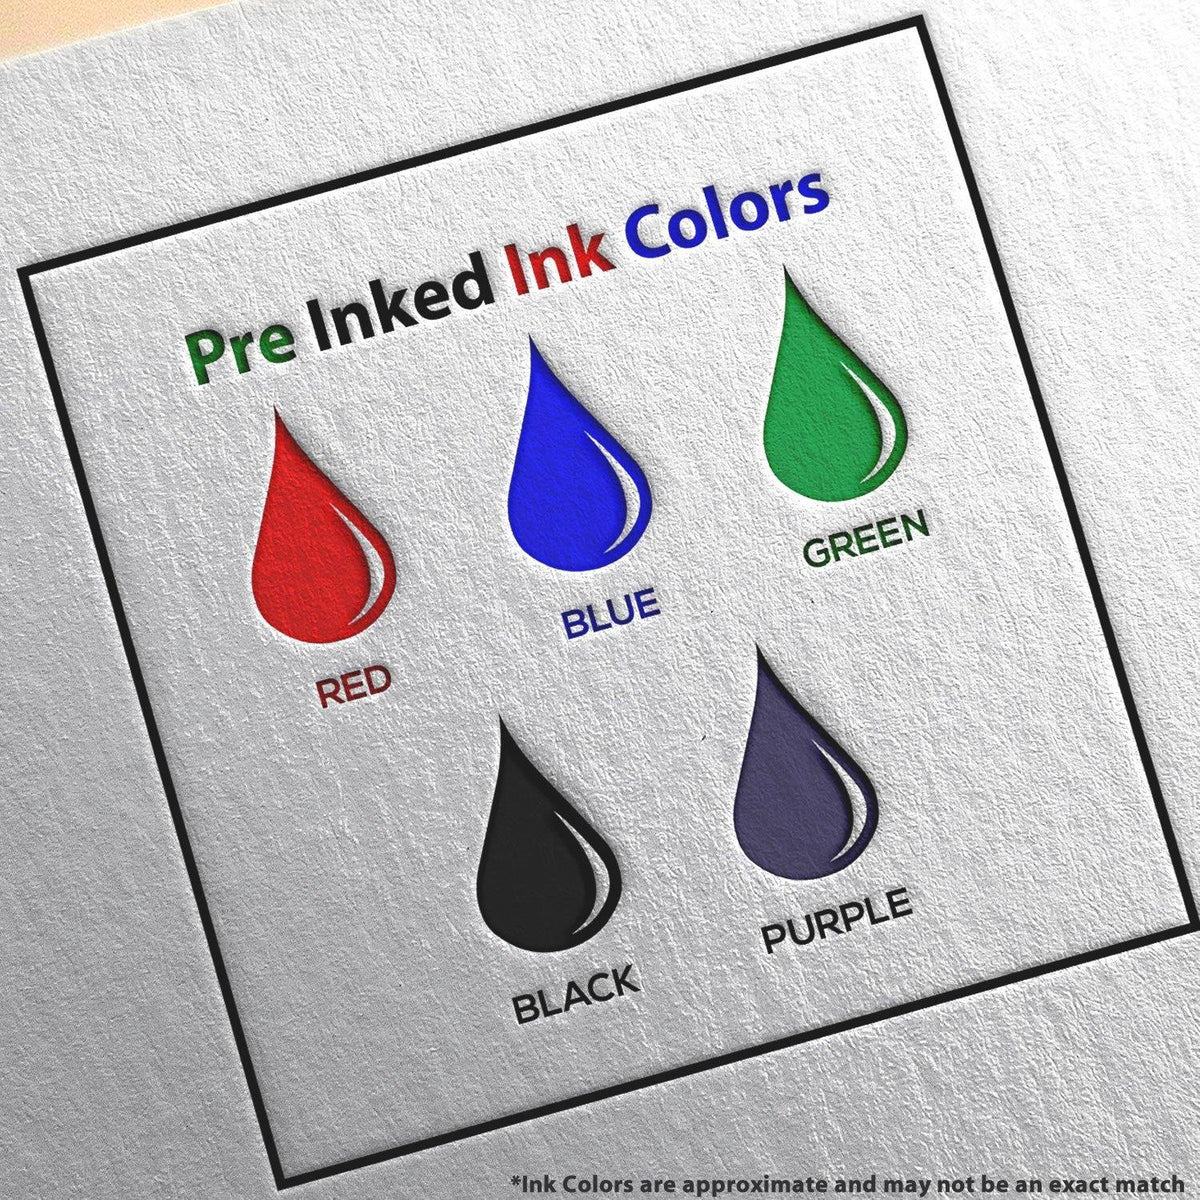 Large Pre-Inked Faxed with Round Date Box Stamp Ink Color Options